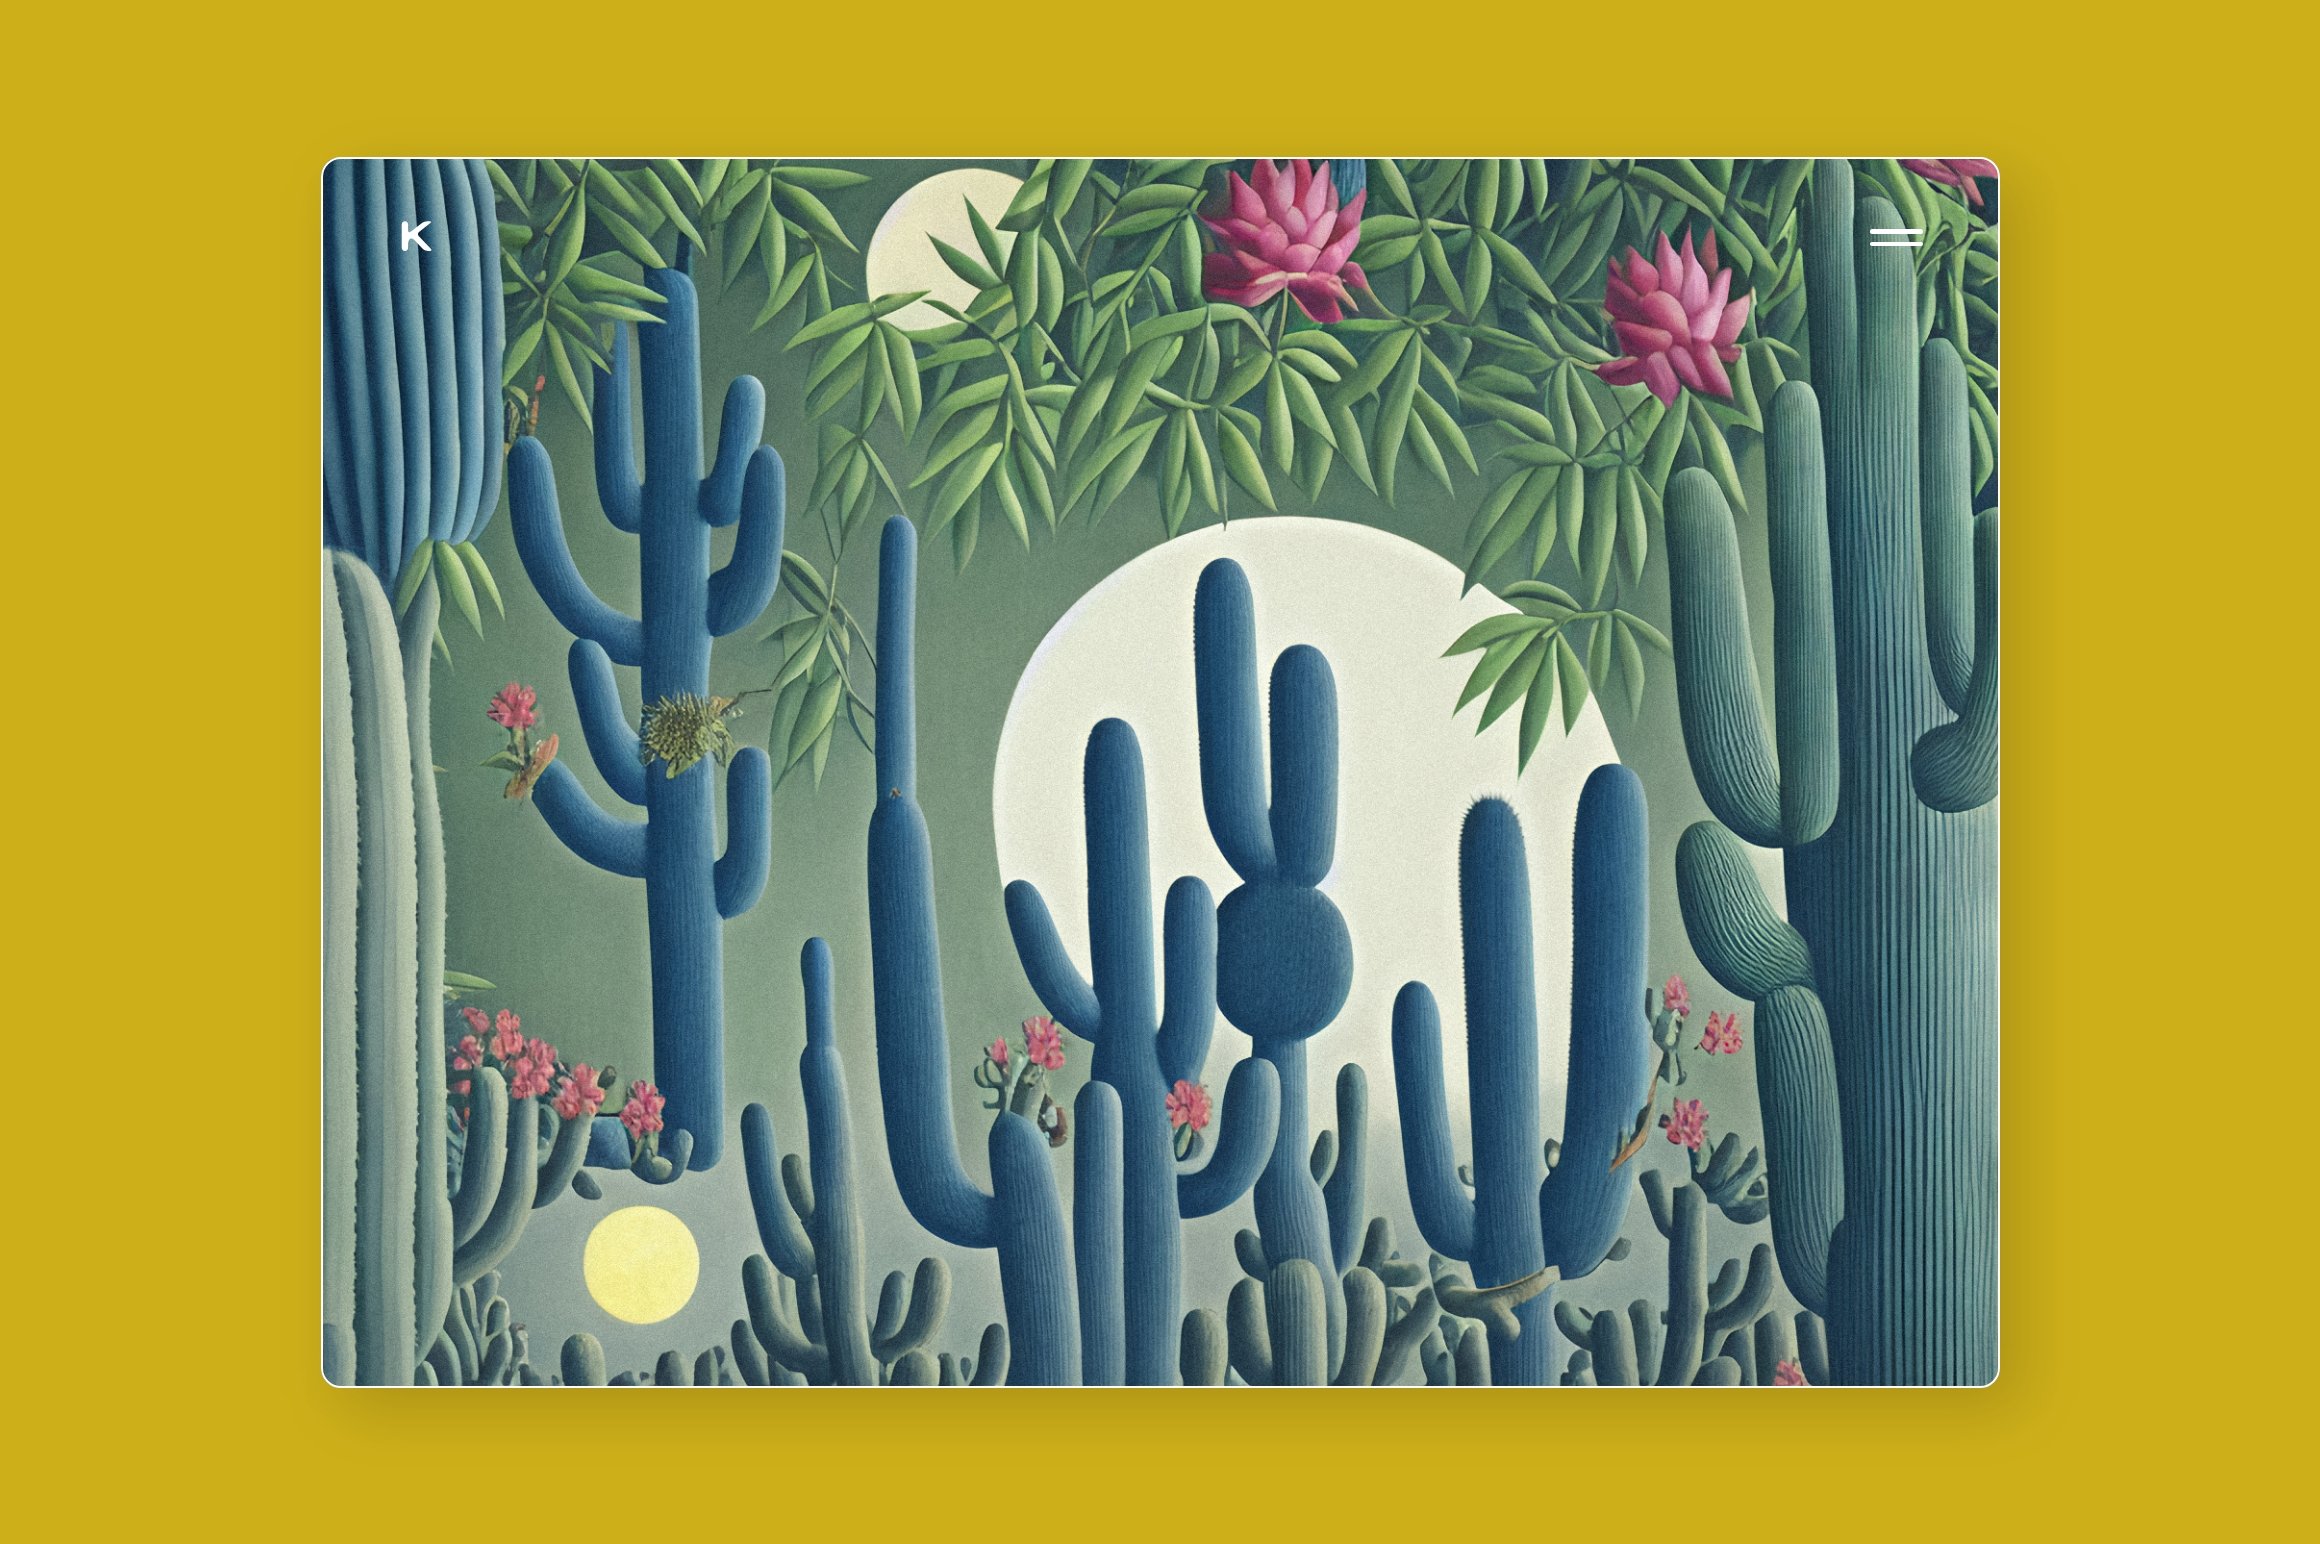 Painting of a desert with cacti and flowers.